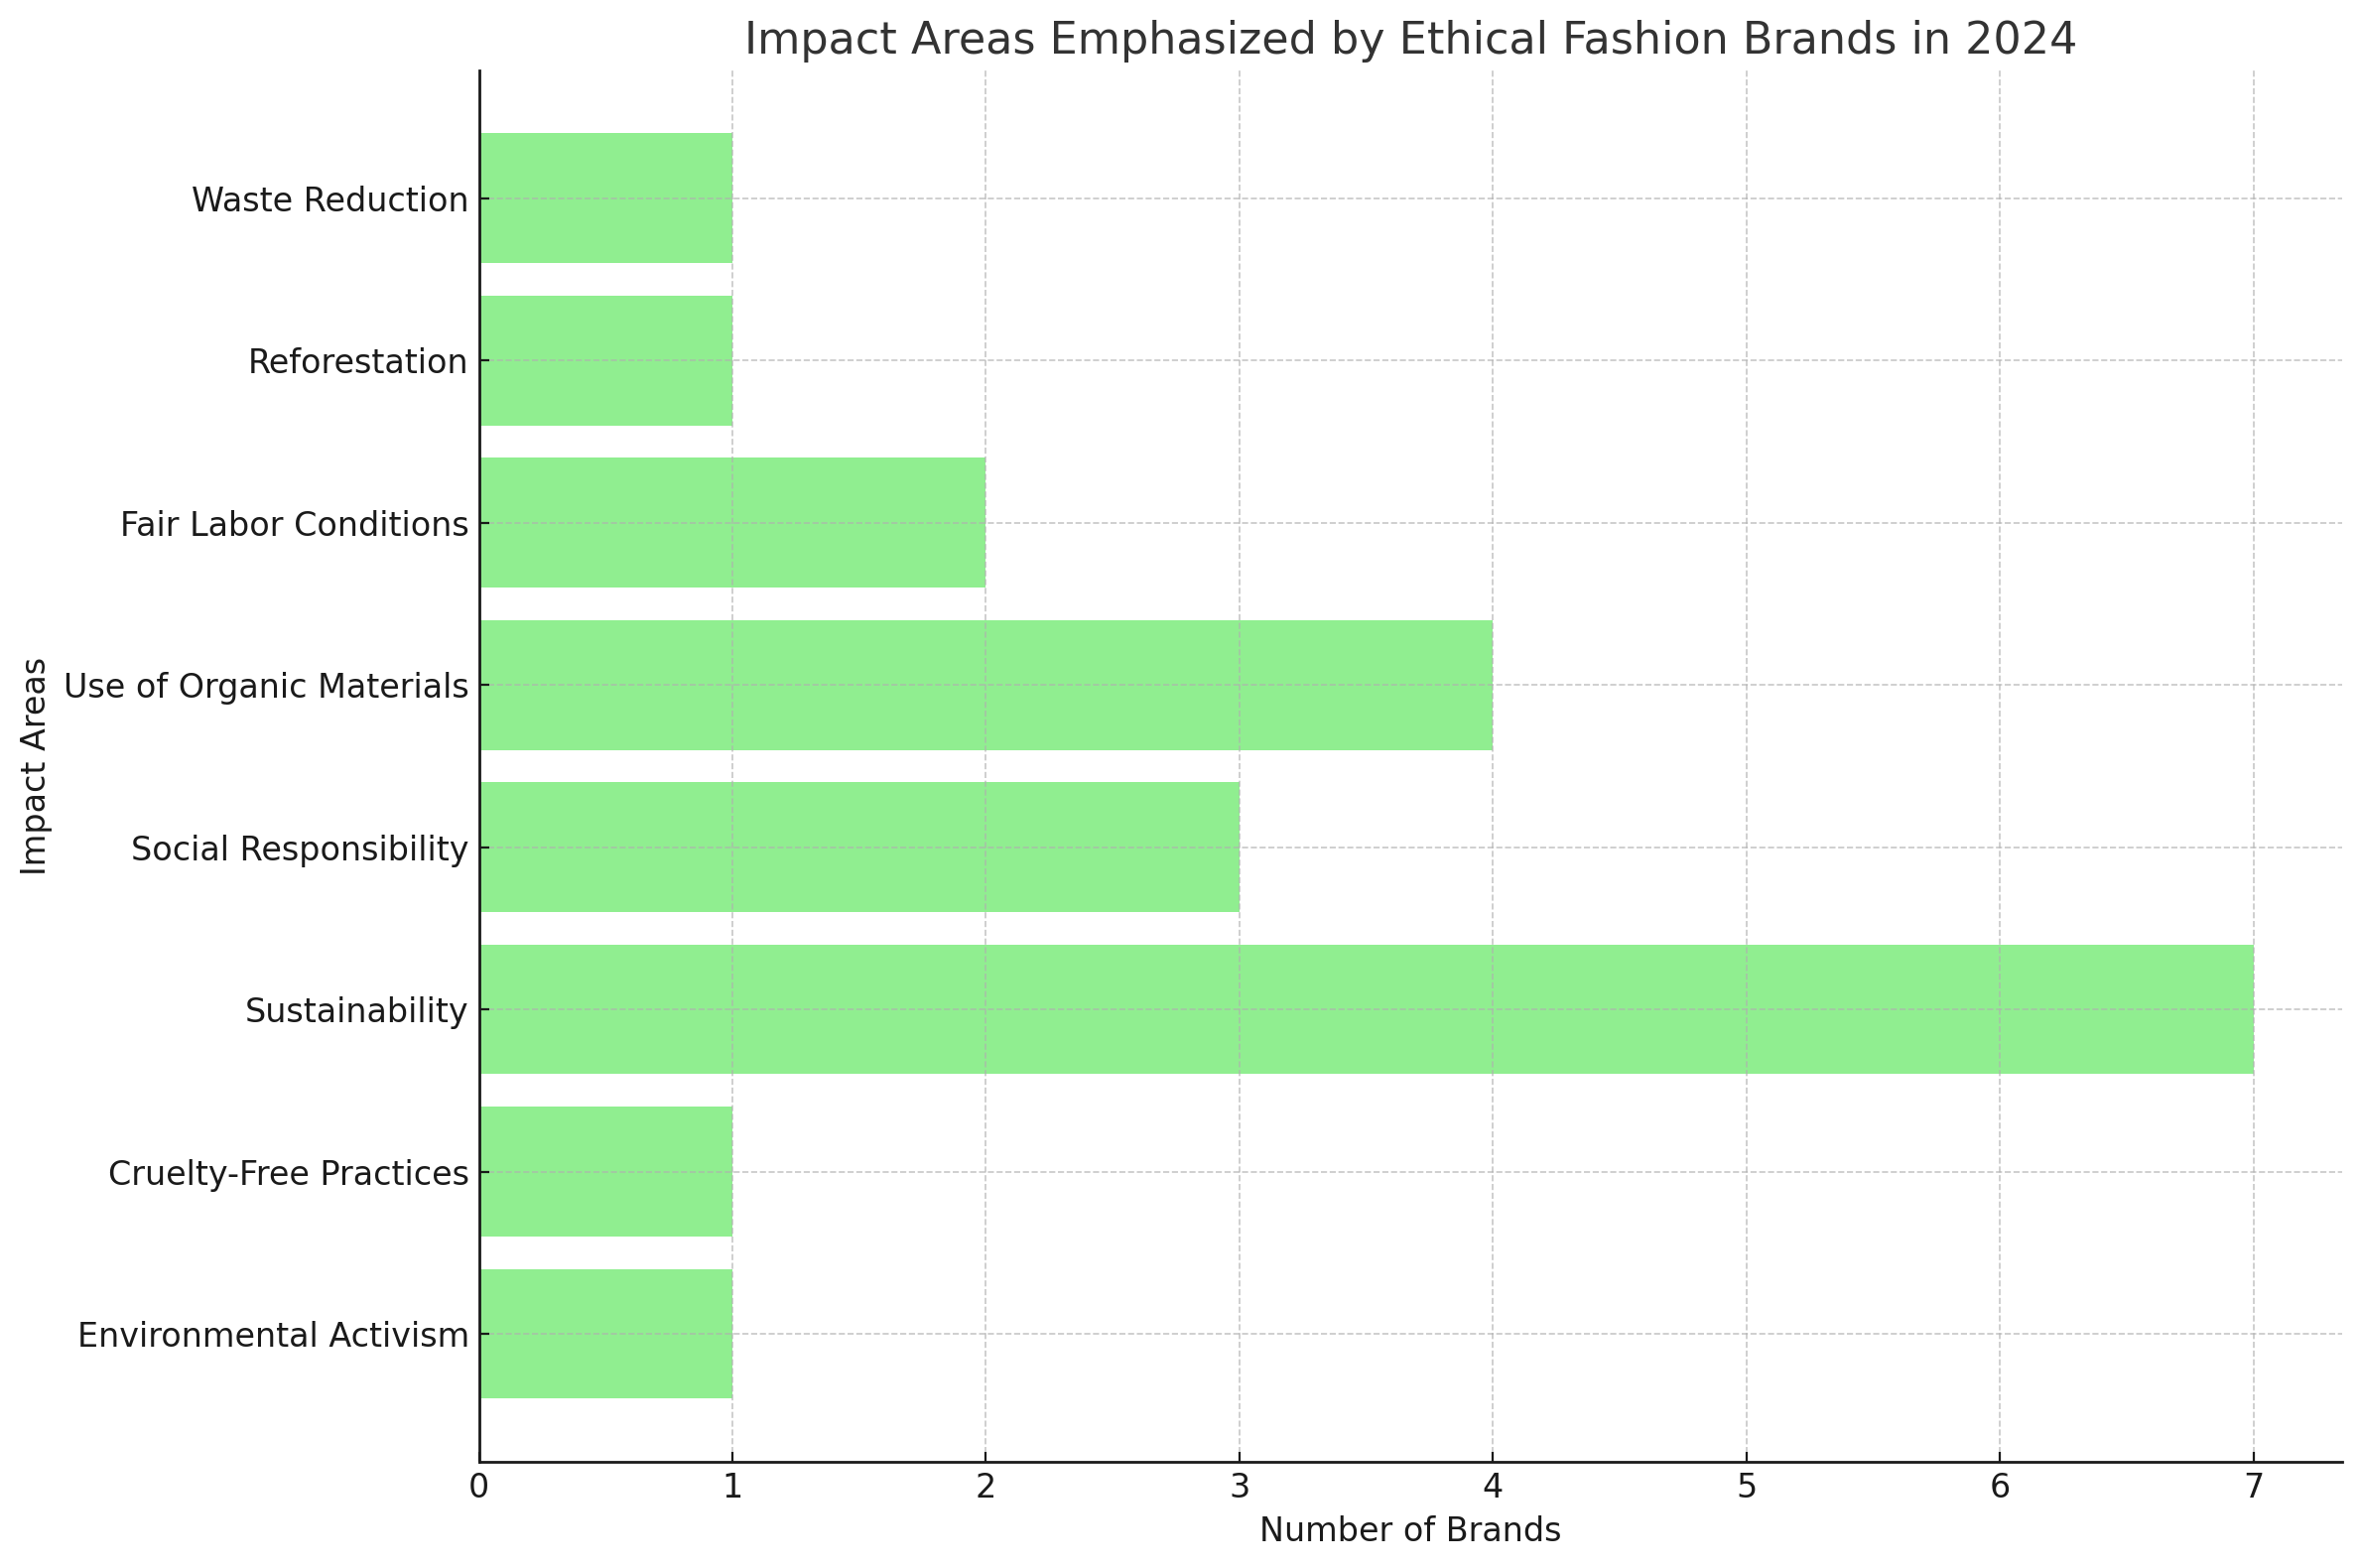 Impact Areas Emphasized by Ethical Fashion Brands